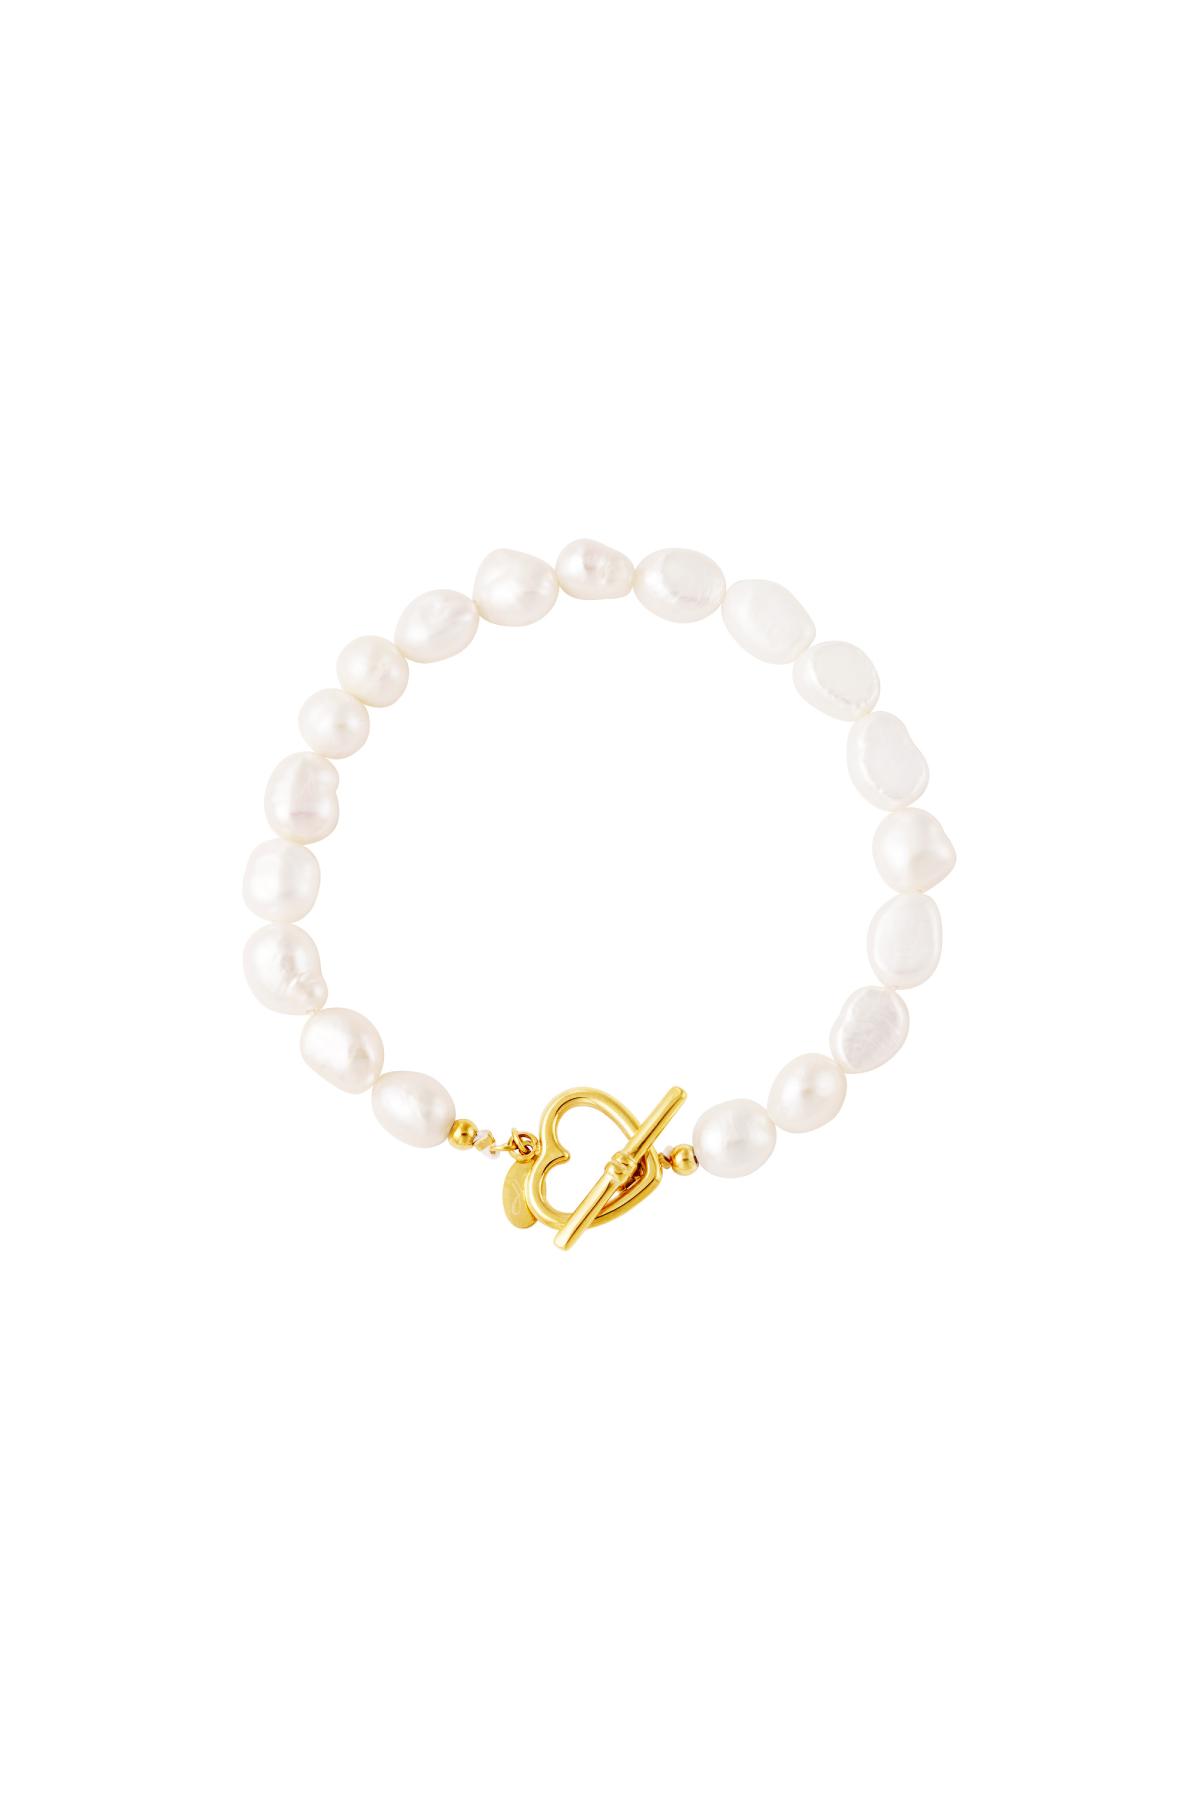 Bracelet pearl heart closure Gold Stainless Steel h5 